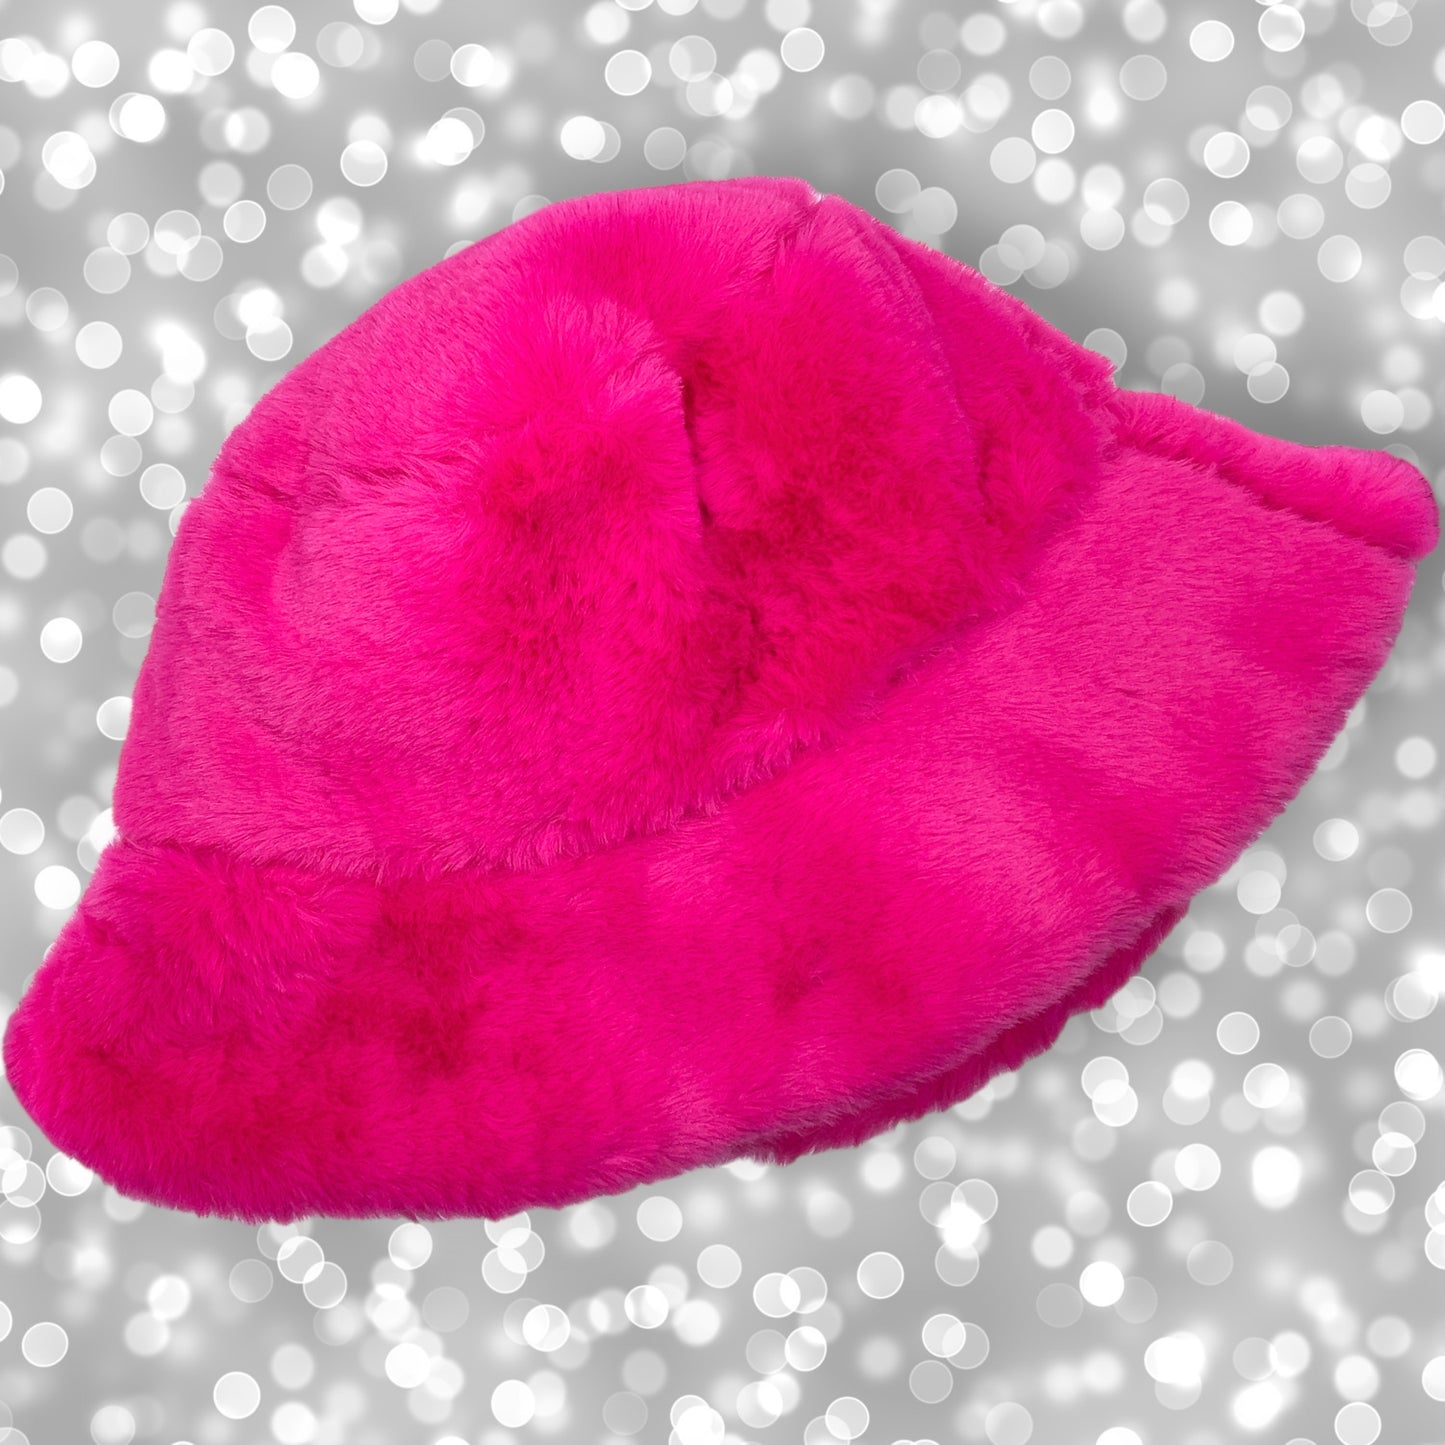 "That's Hot" Pink Furry Festival Bucket Hat